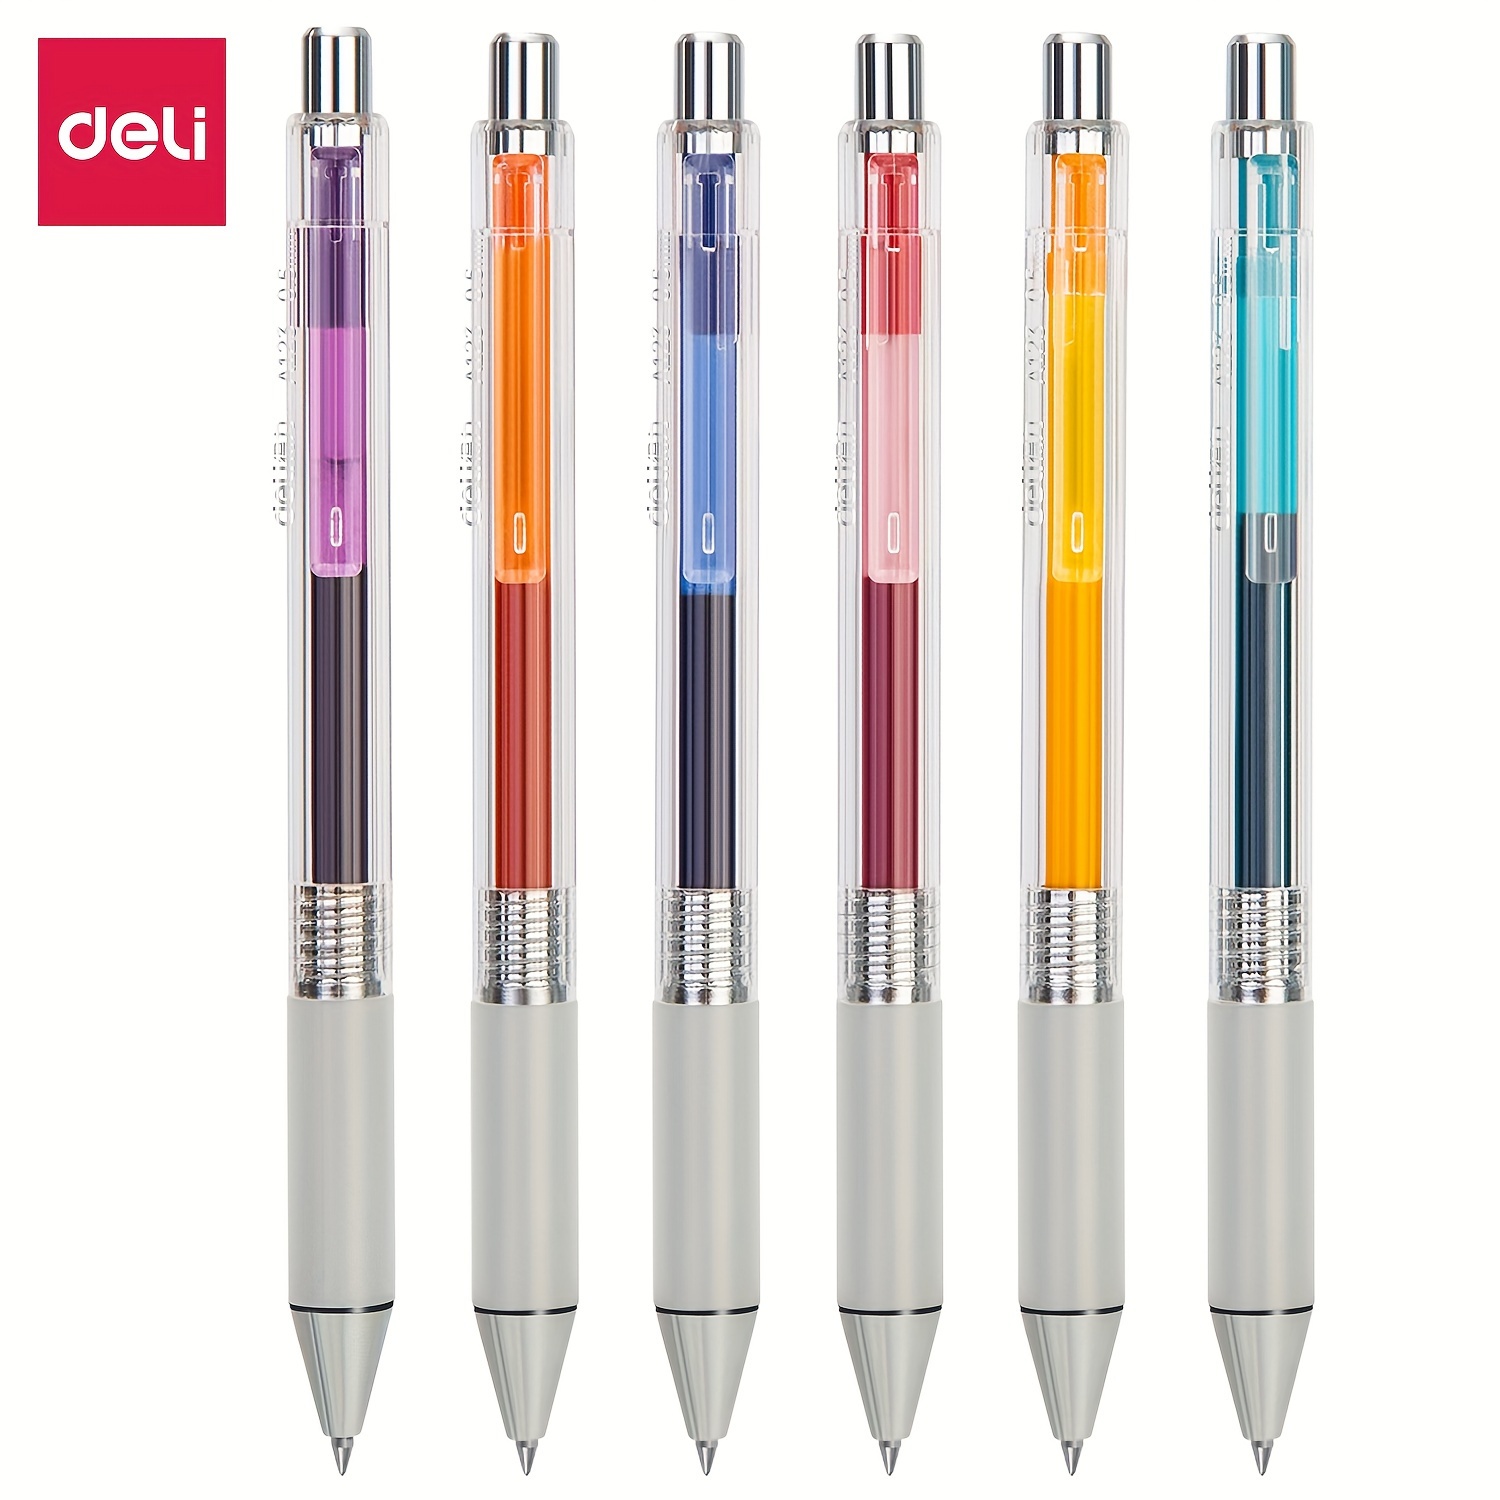 AIHAO 6 Packs Journaling Gel Pens, Cute Assorted Color Pens, Fine Point  0.5mm, Neon Color Pens For Coloring, Note-taking